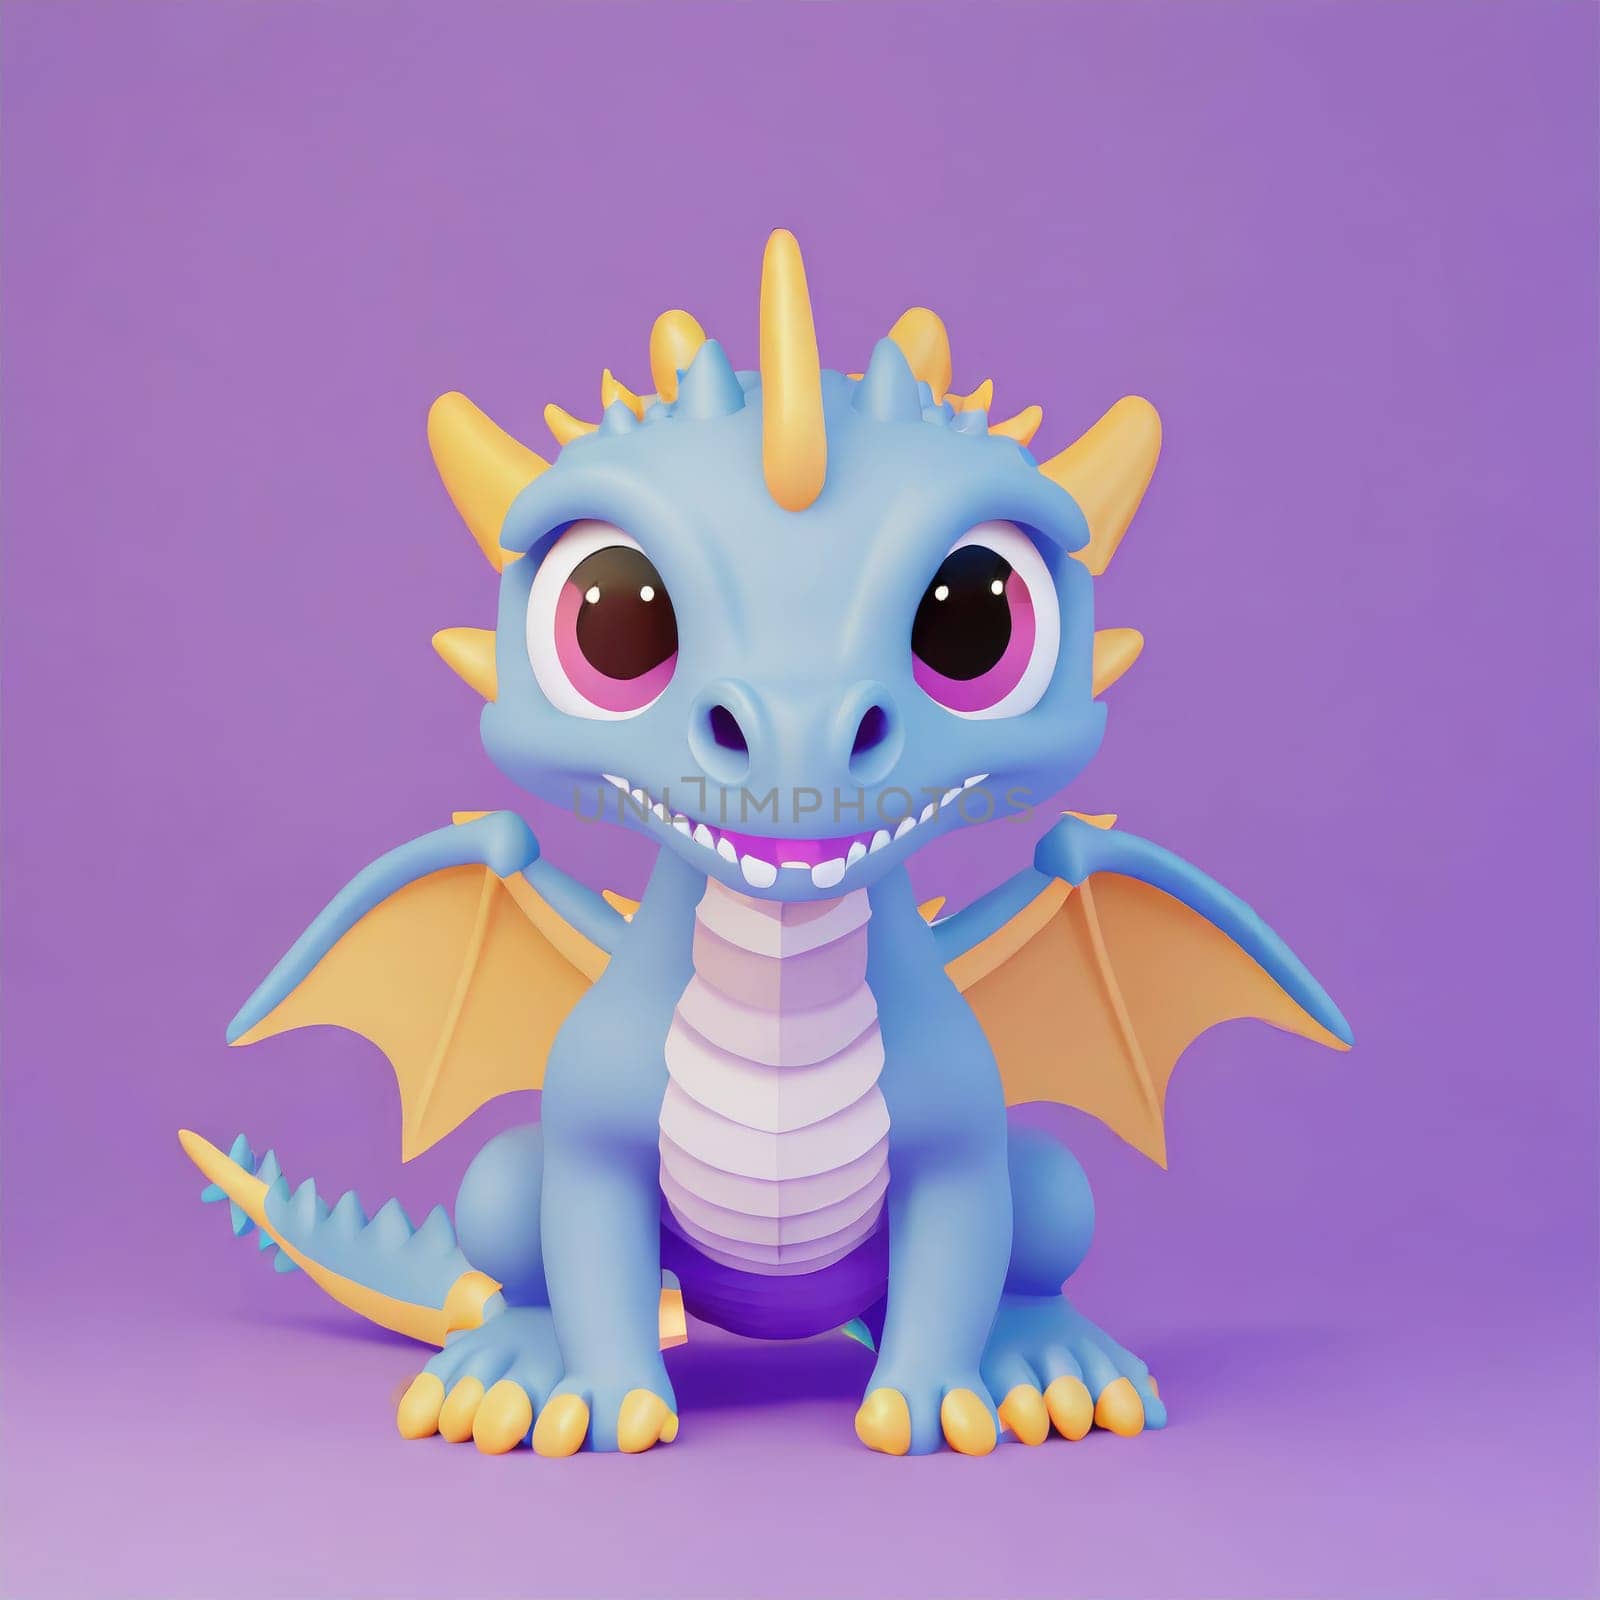 cute little baby dragon with big black eyes. Fantasy monster. Small Funny Cartoon character. Fairy tale. Isolated on black background.